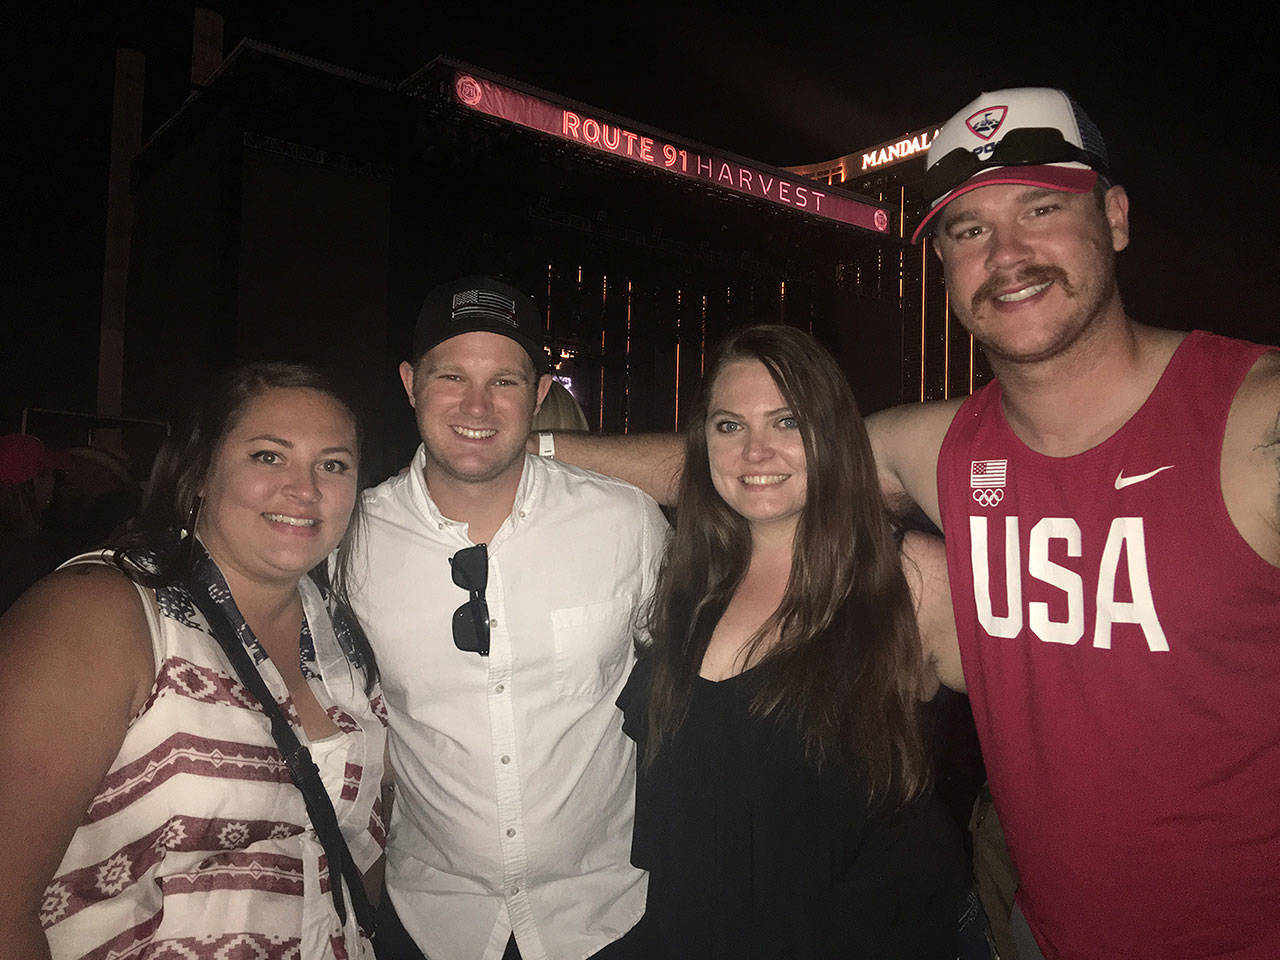 Ali Pendergrass, Nick Pendergrass, Alicia Hounsley and Tyler Hickman, from left, pose for a photo outside the Route 91 Harvest Music Festival in Las Vegas, moments before a gunman opened fire on the crowd of concertgoers, killing 58 and injuring 527. (Ali Pendergrass)